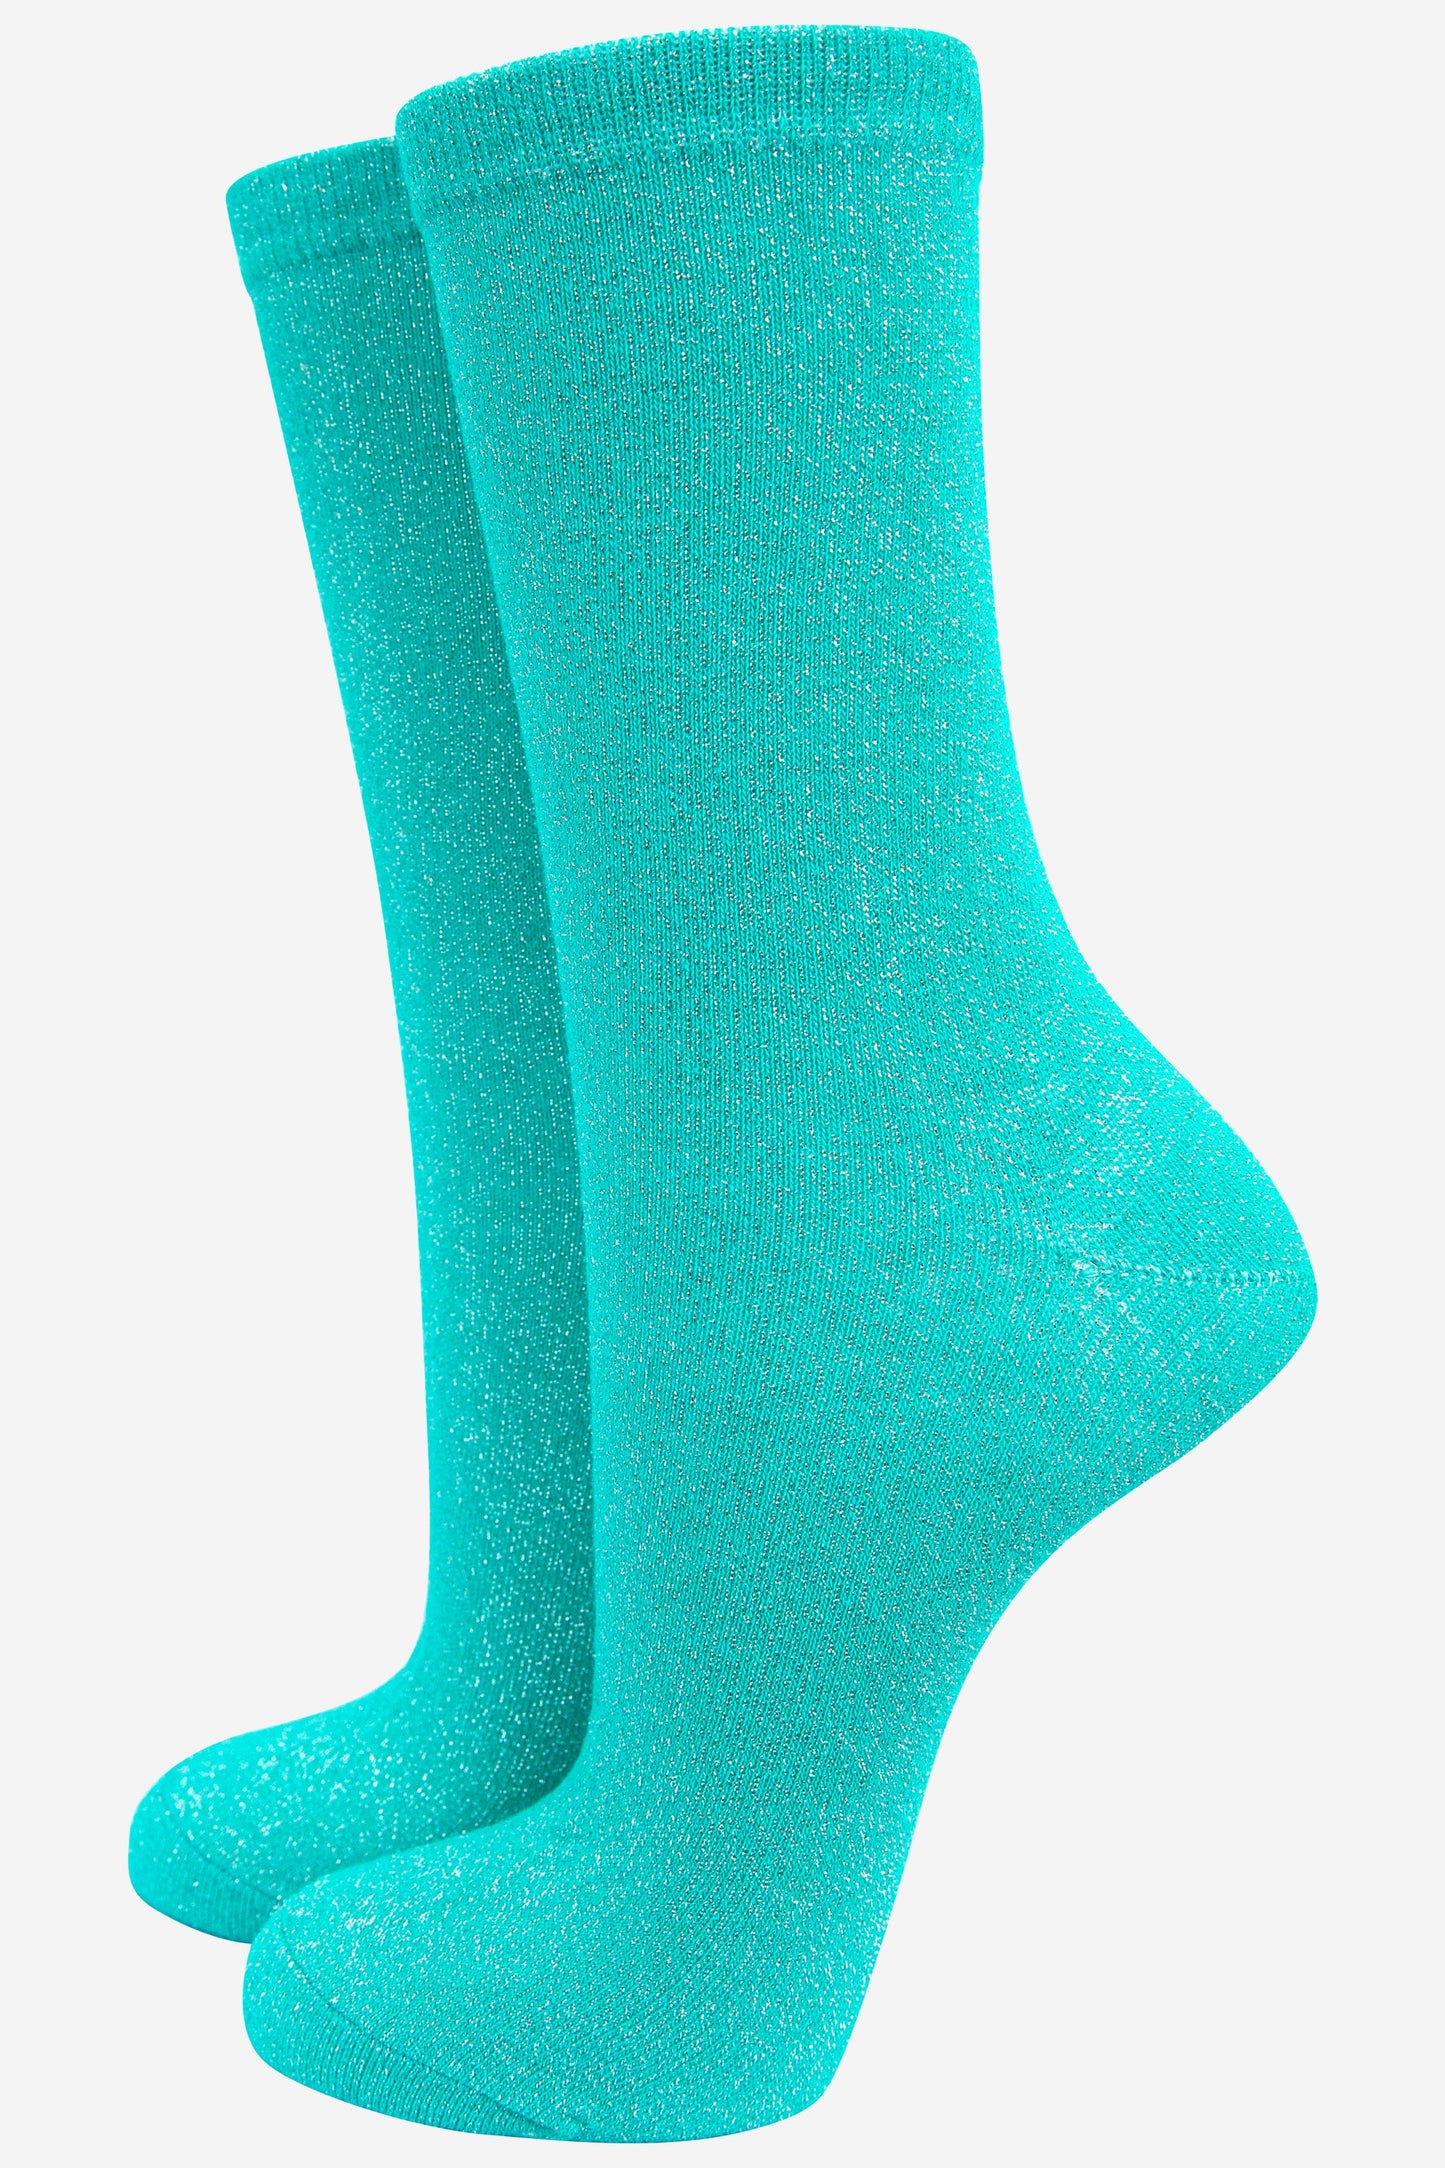 turquoise ankle socks with an all over sparkly glitter shimmer